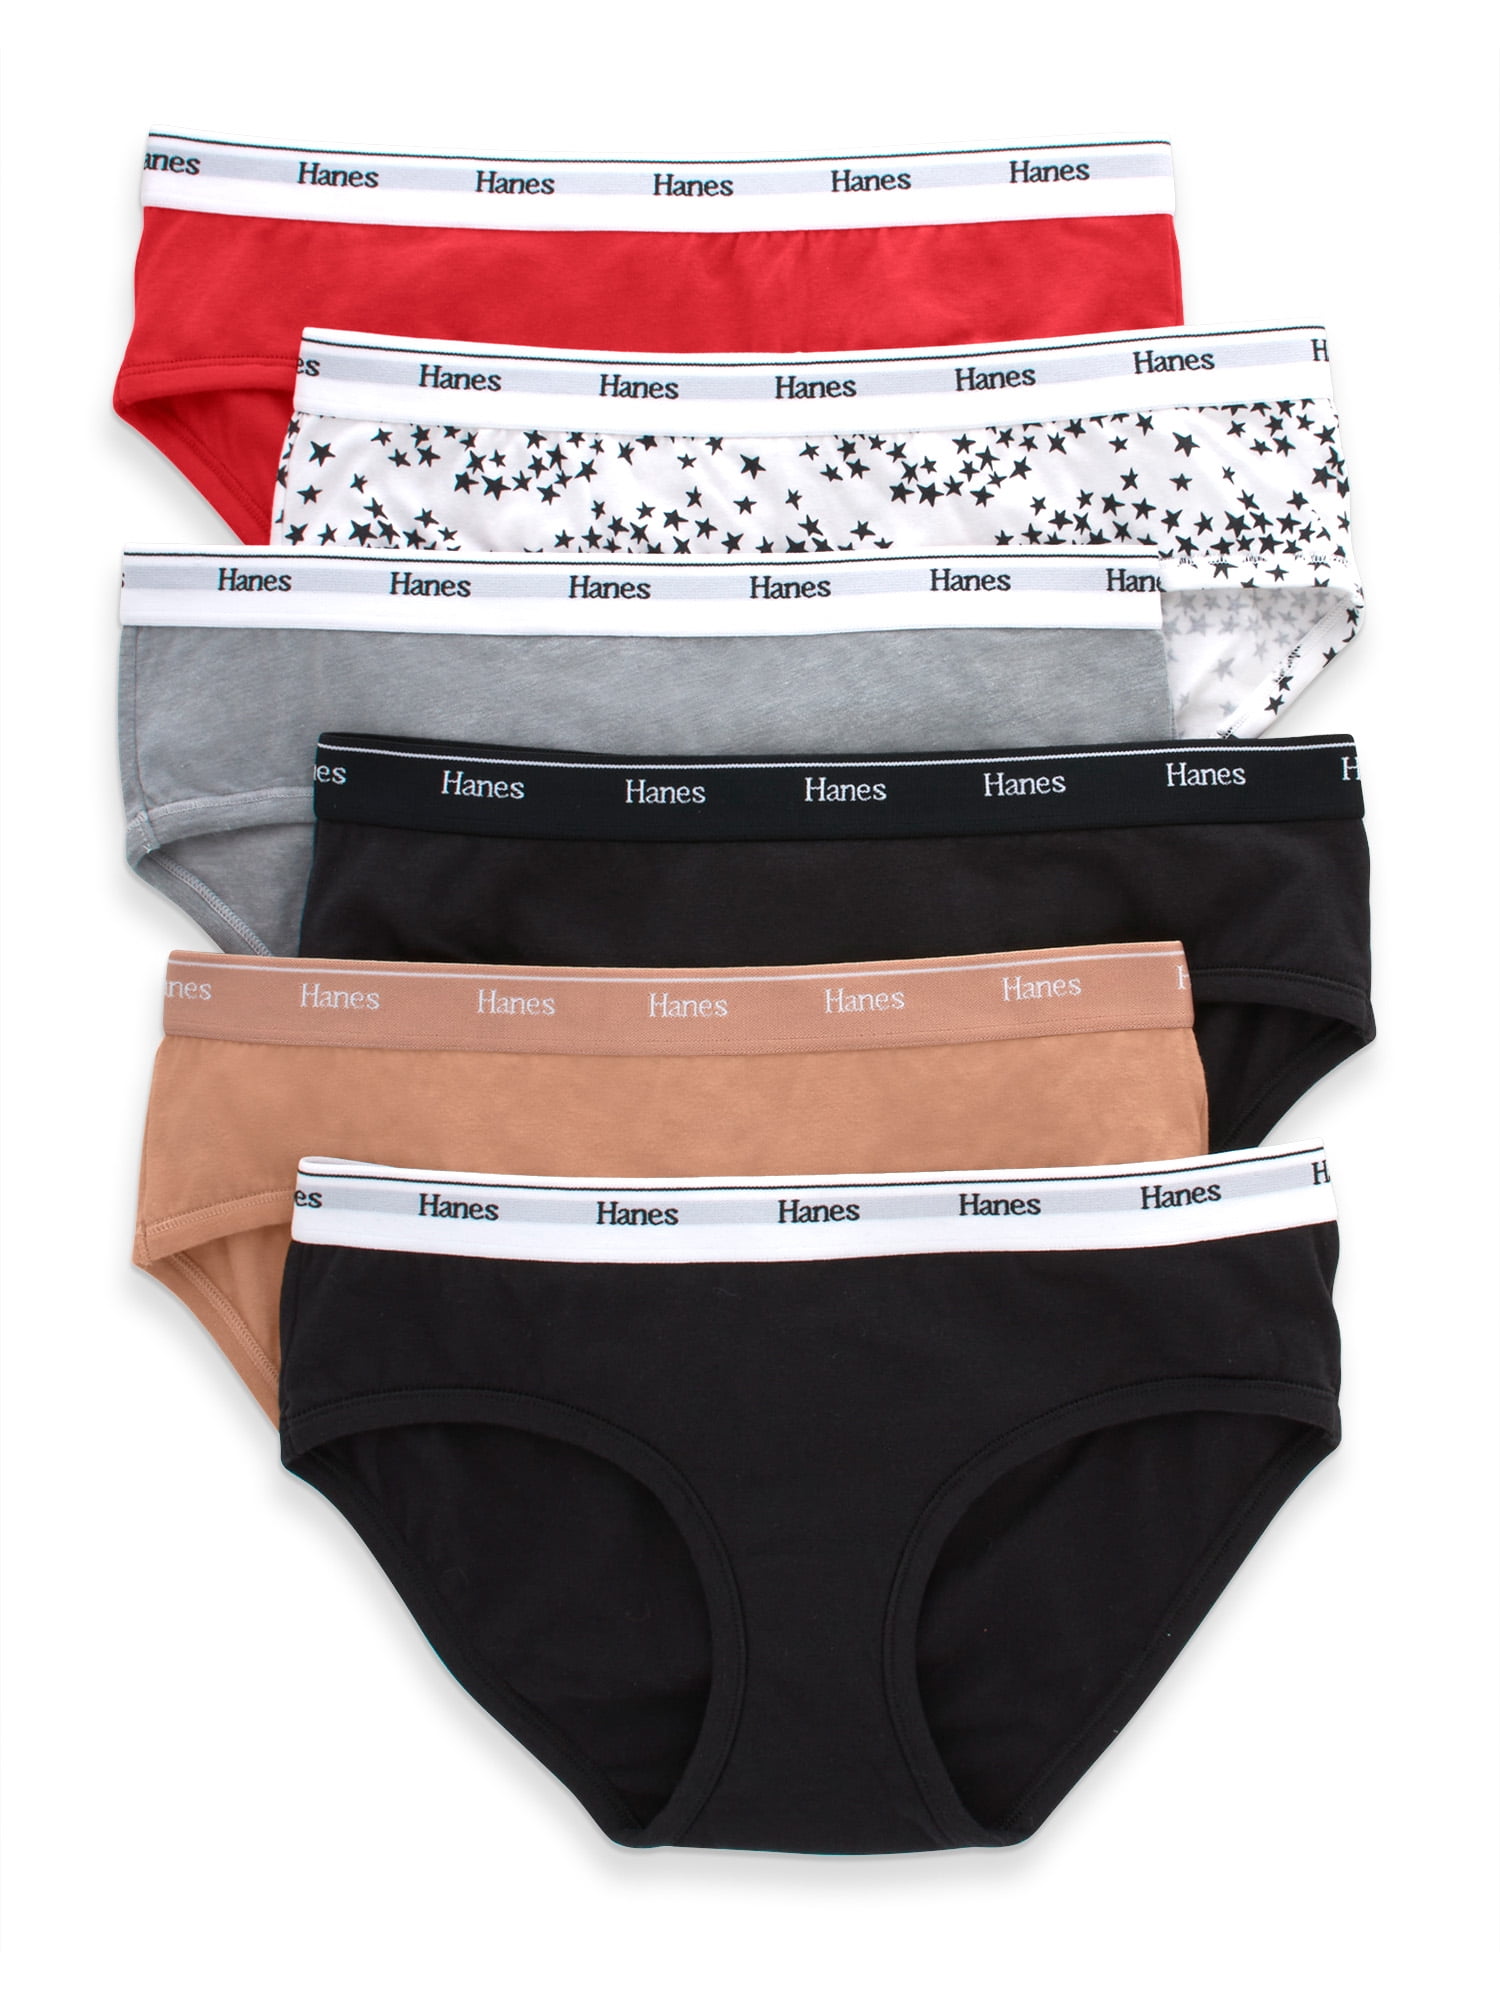 INNERSY Womens Underwear Cotton Hipster Panties Low Rise Basics